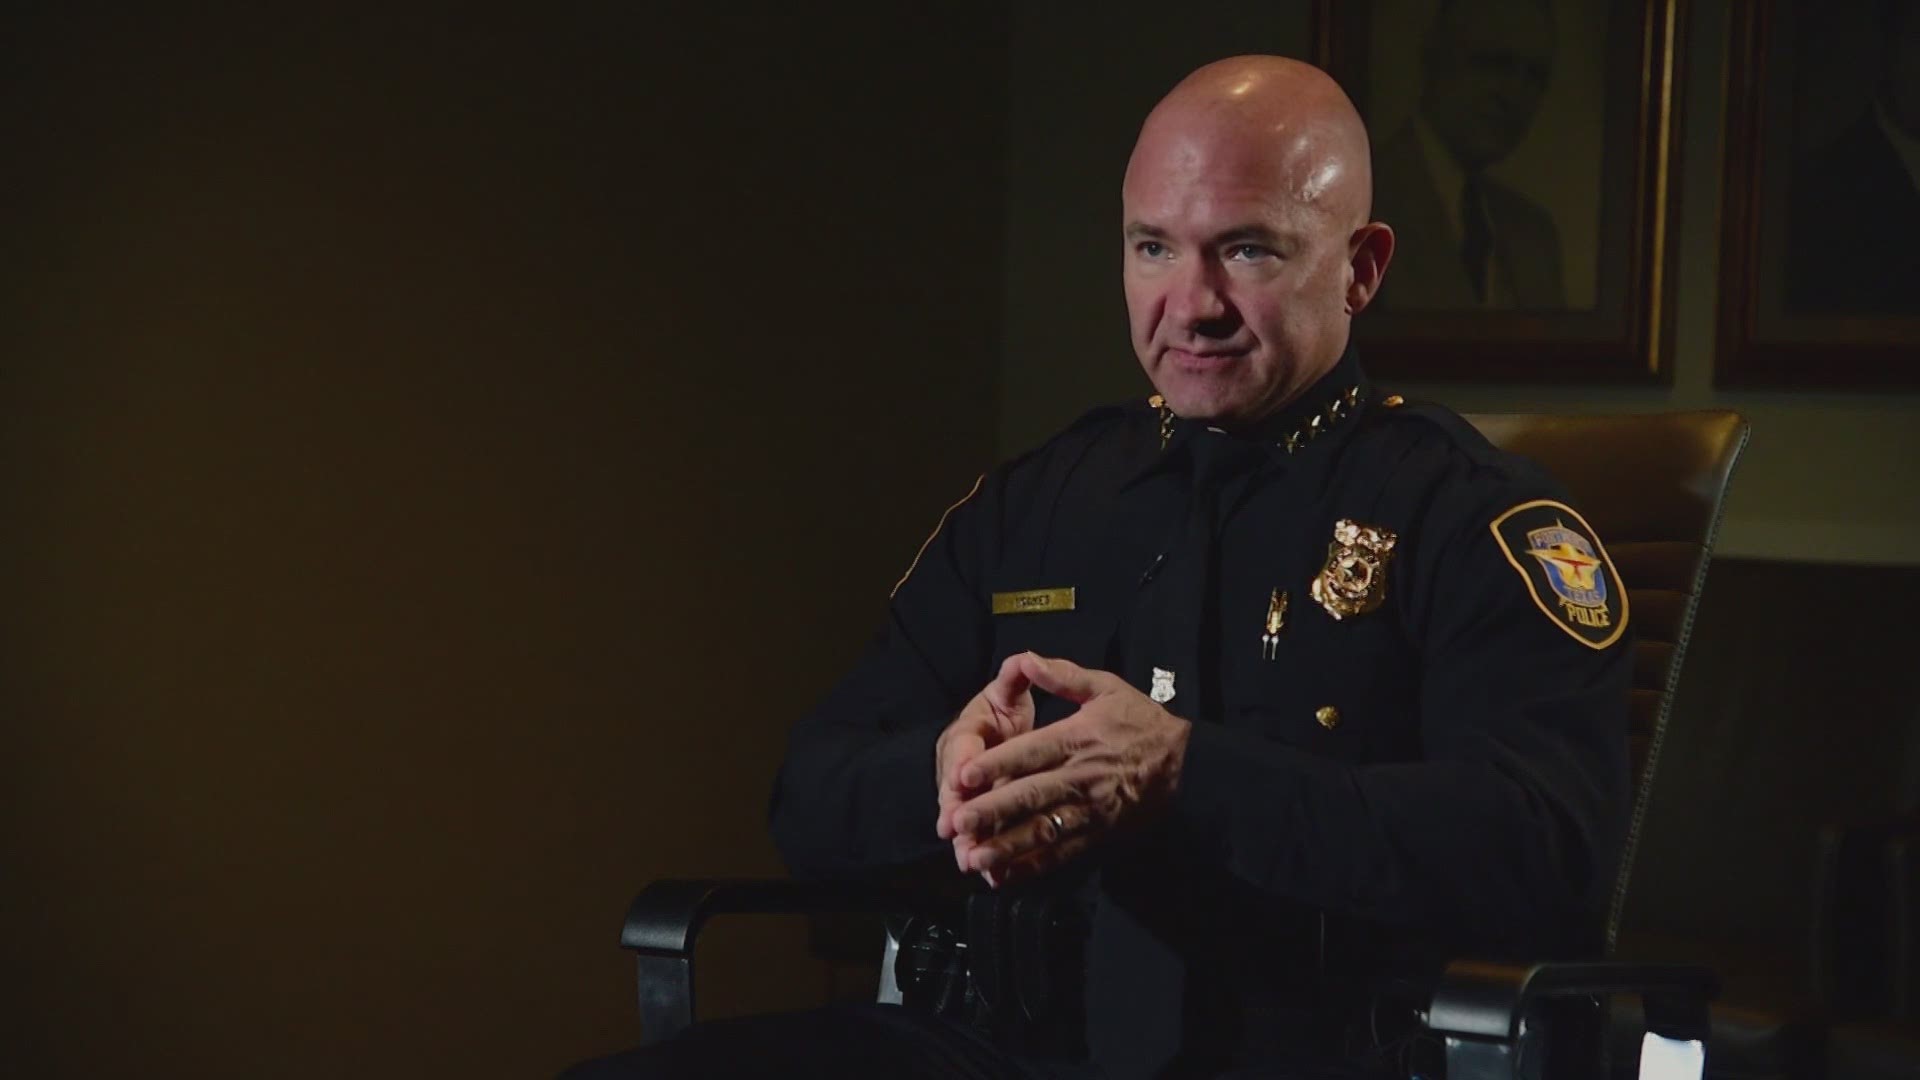 Chief Neil Noakes said the Fort Worth Safe program quietly launched earlier this year is leading to arrests, but homicides are at near-record levels.